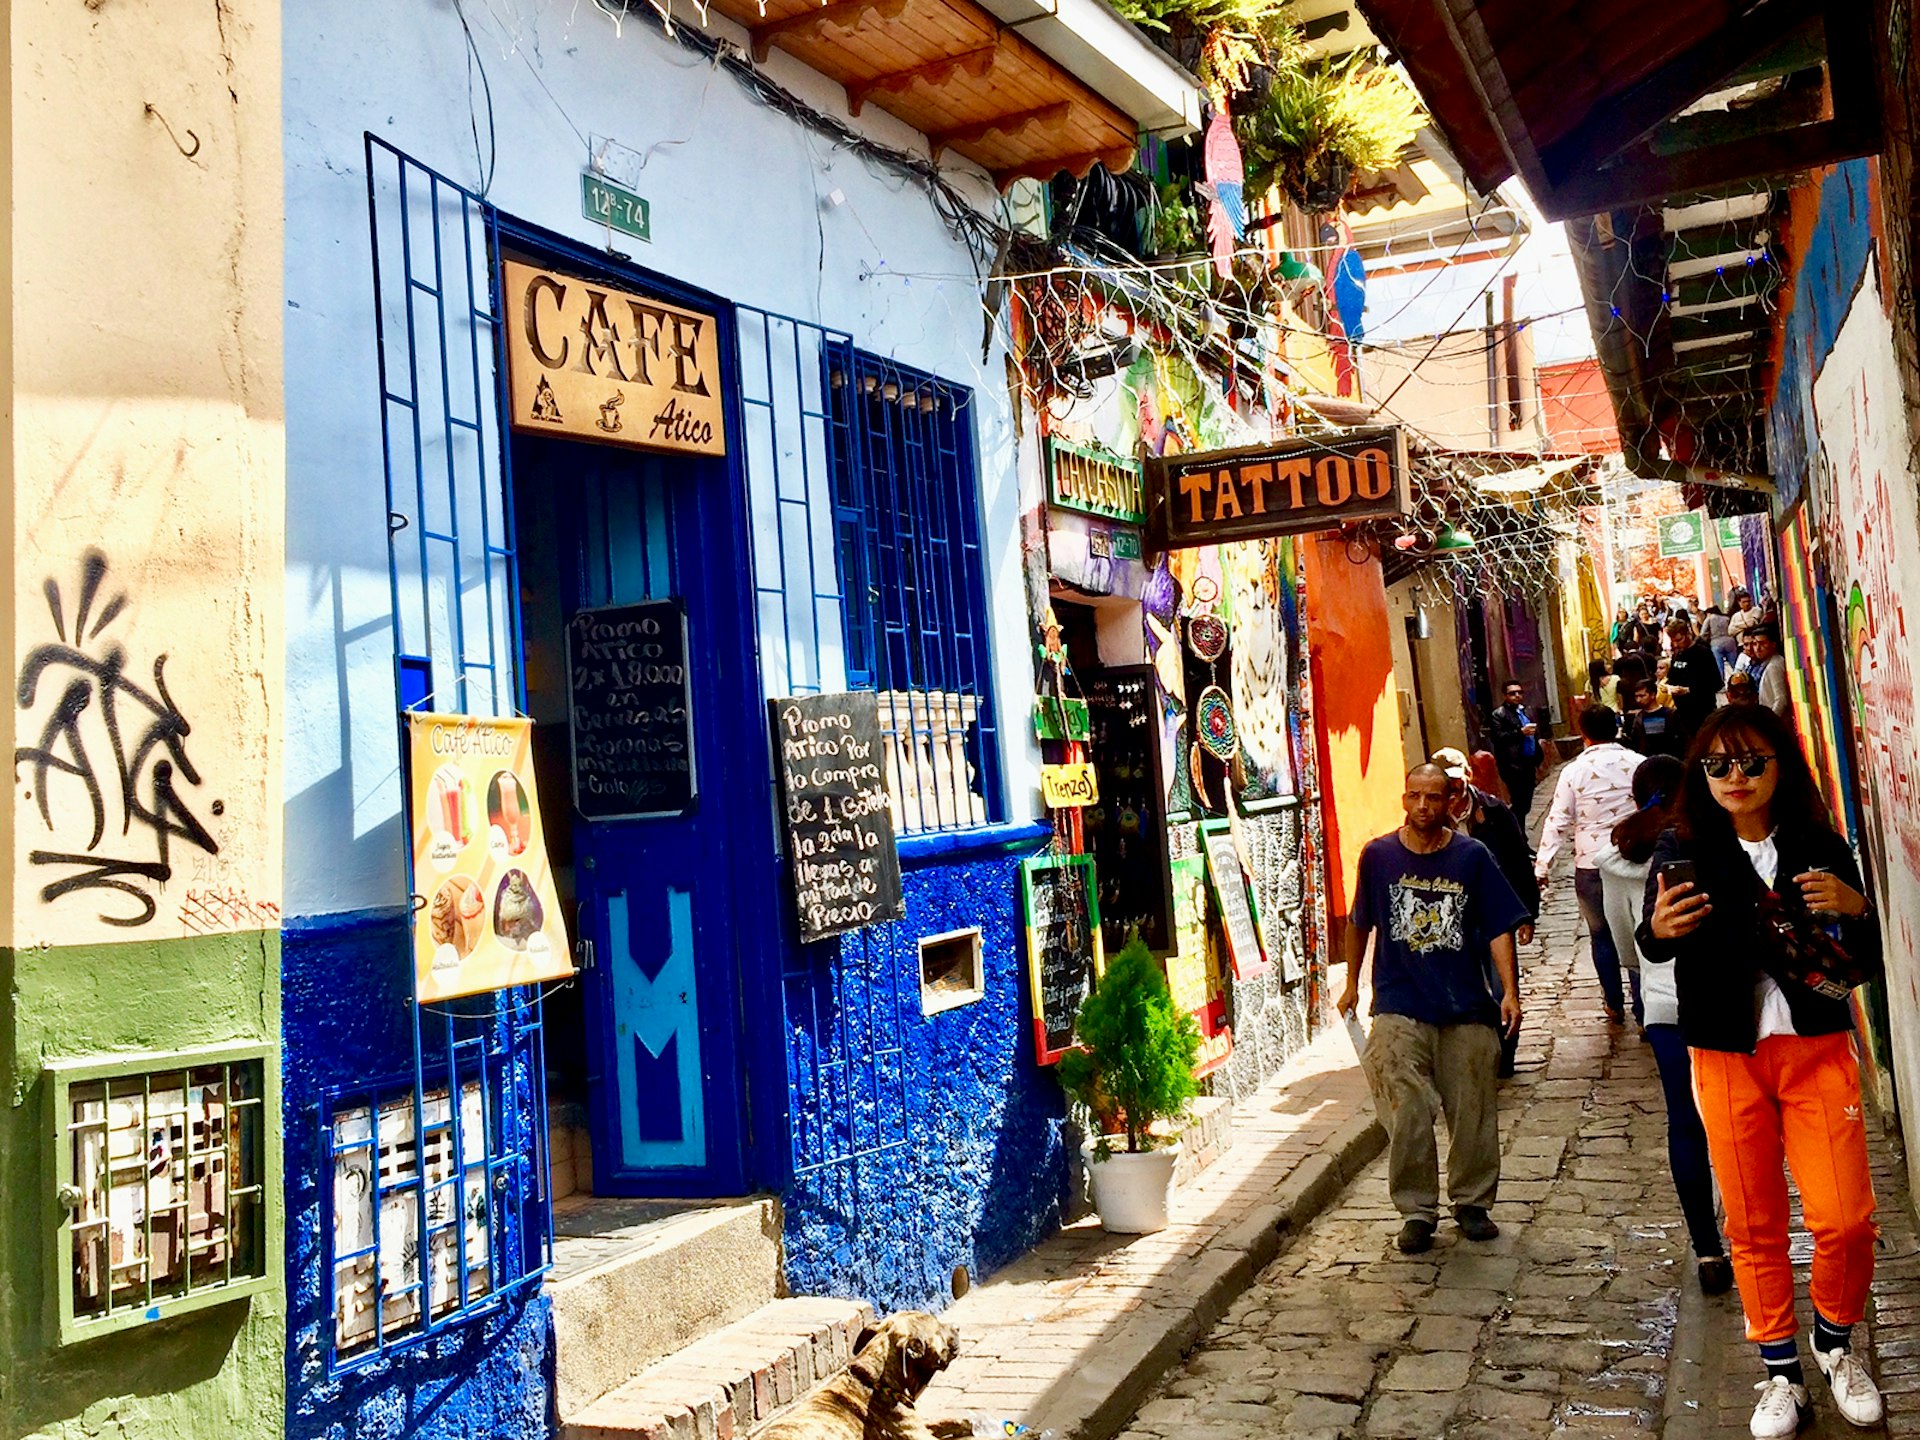 People walk down a narrow cobblestoned streets with colorfully painted shops on either side